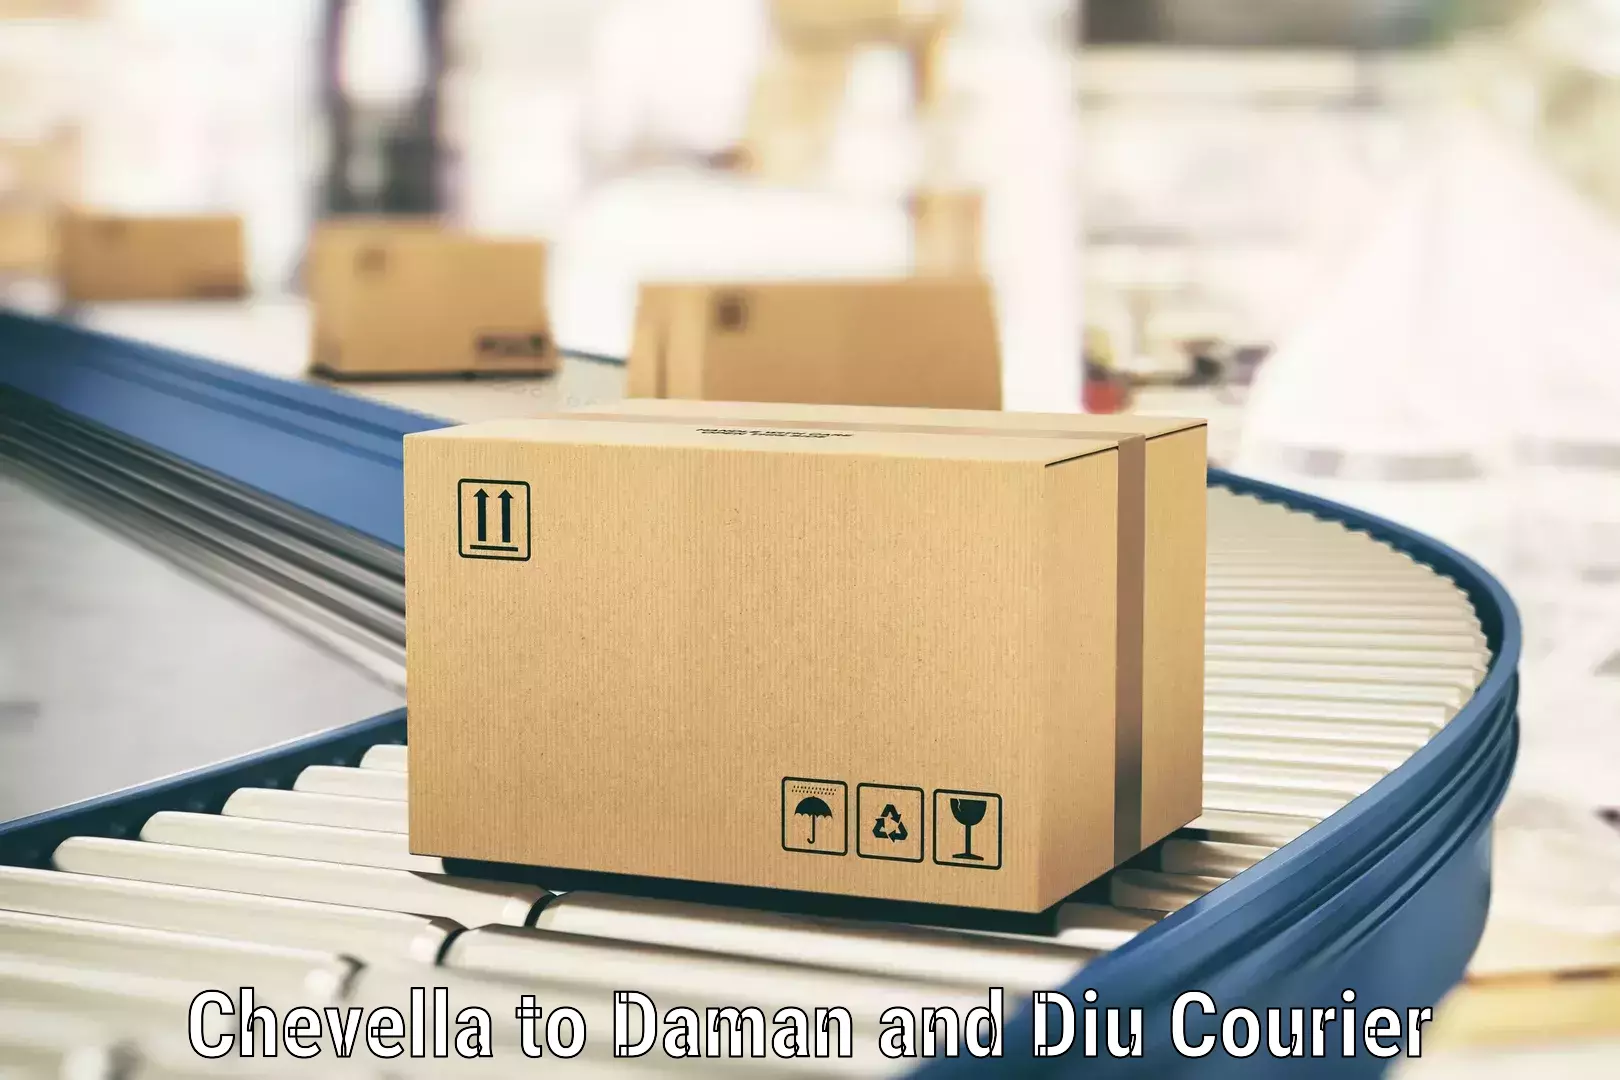 24-hour courier services Chevella to Daman and Diu